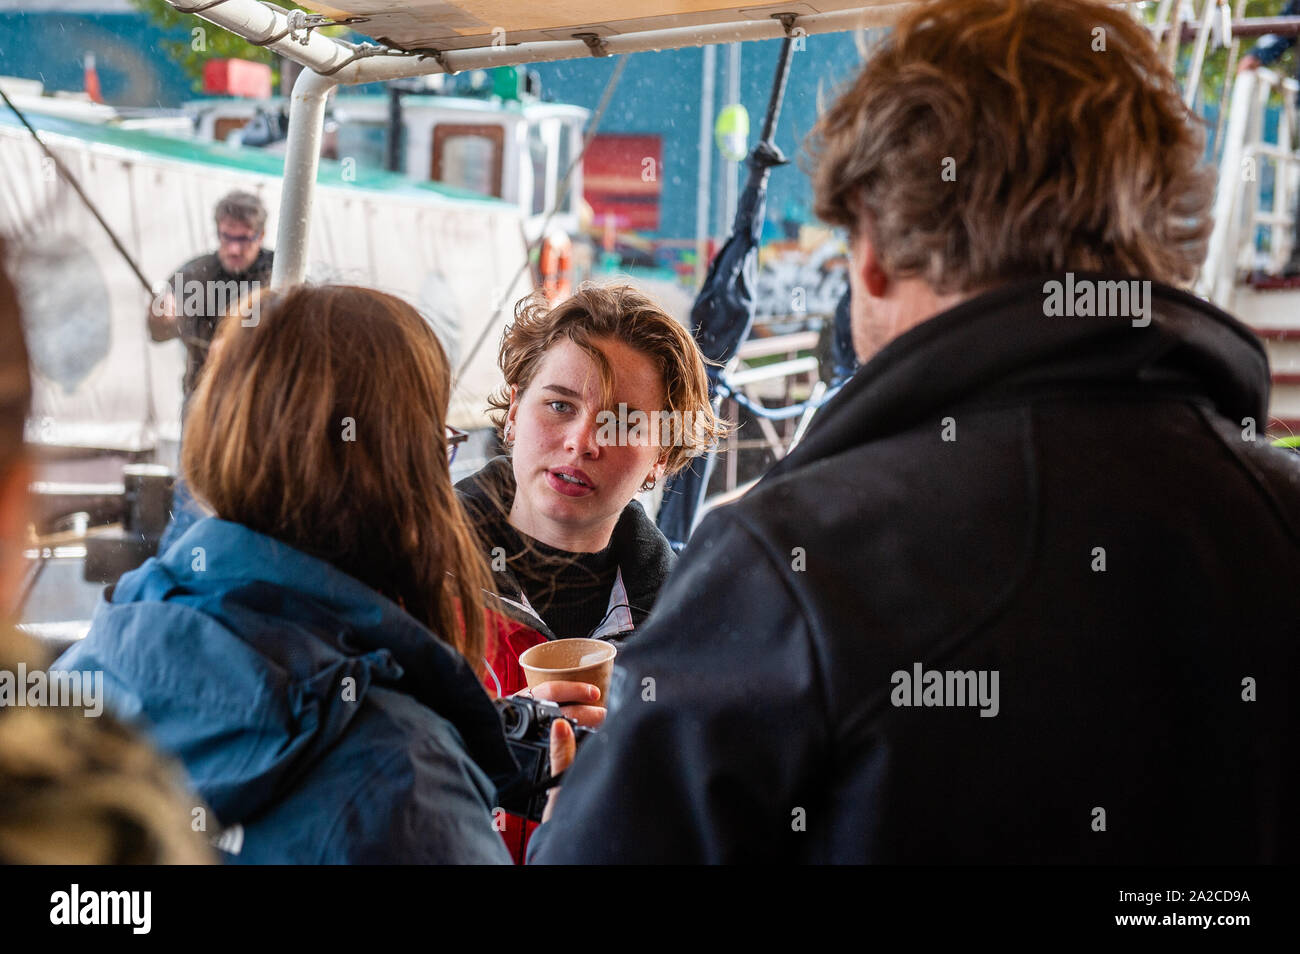 Belgian climate activist, Anuna de Weber talks to her family on the boat.From the NDSM Wharf in Amsterdam, 36 climate activists are sailing out to go to the UN Climate Conference in Santiago, Chile. Between them, there is Anuna de Weber, who is the organizer of the Climate Strikes in Belgium and Adélaïde Charlier, French-speaking coordinator for the 'Youth for climate' movement. Their mission as Greta Thunberg already did, is decrease the climate impact of traveling. They will be sailing for around 7 weeks to Rio de Janeiro, and from there they will travel by bus. Stock Photo